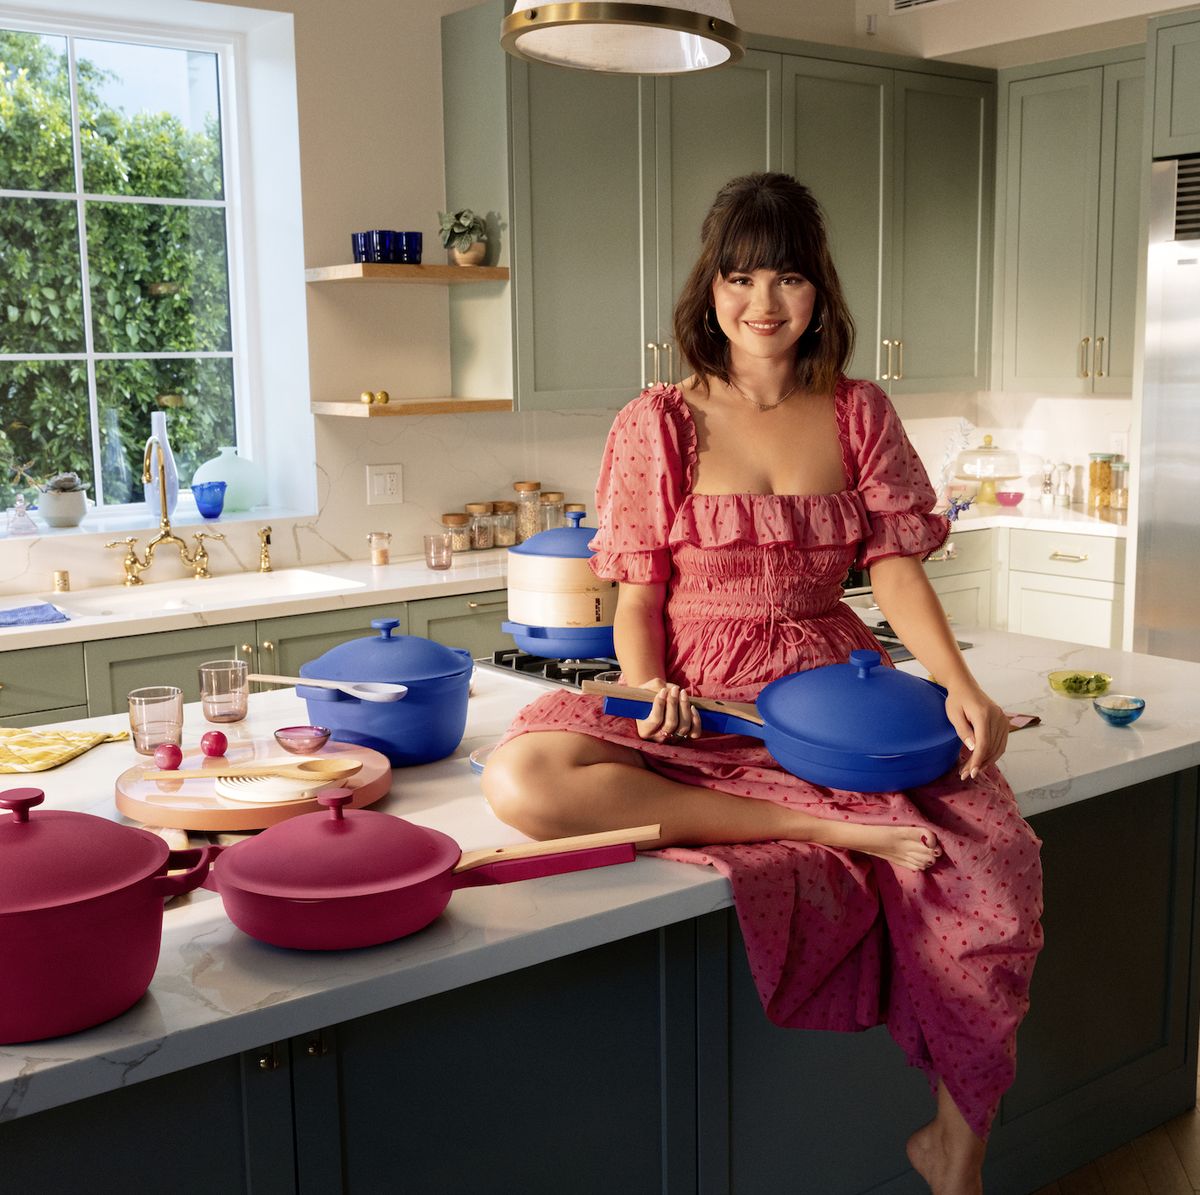 Selena Gomez named in Spanish her cookware collection